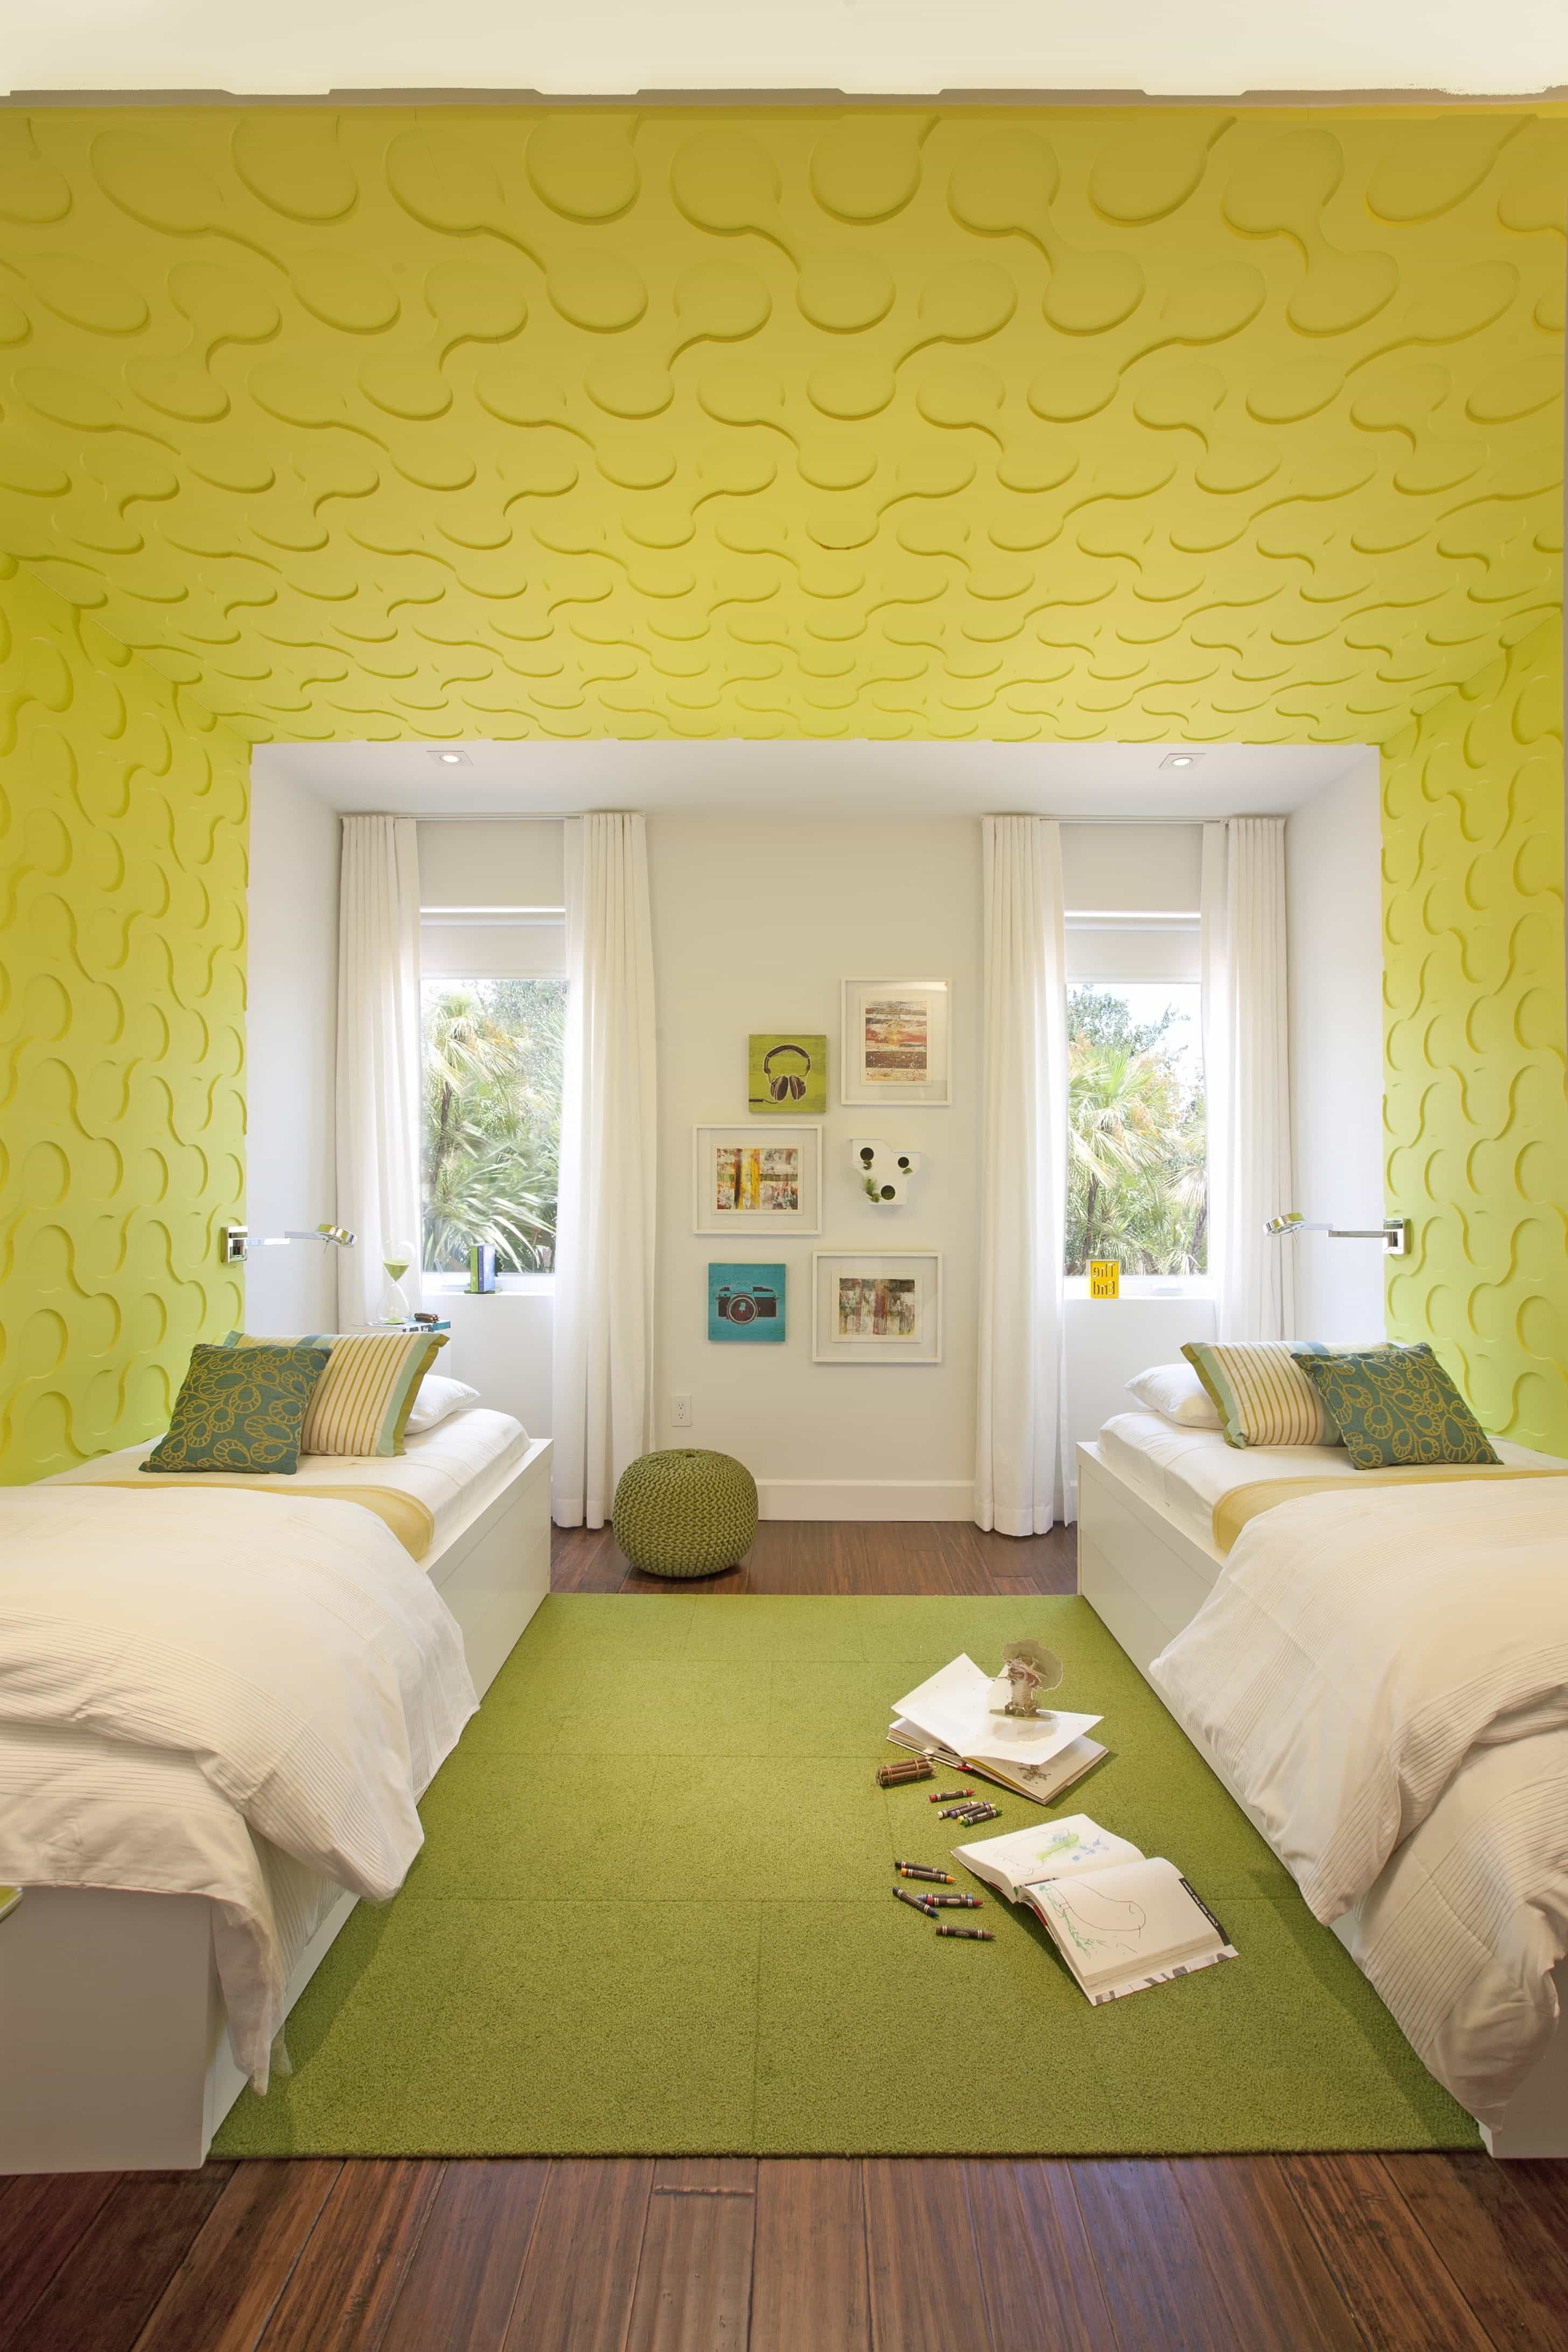 Fun Modern Kids’ Bedroom With Yellow Textured Walls (View 7 of 27)